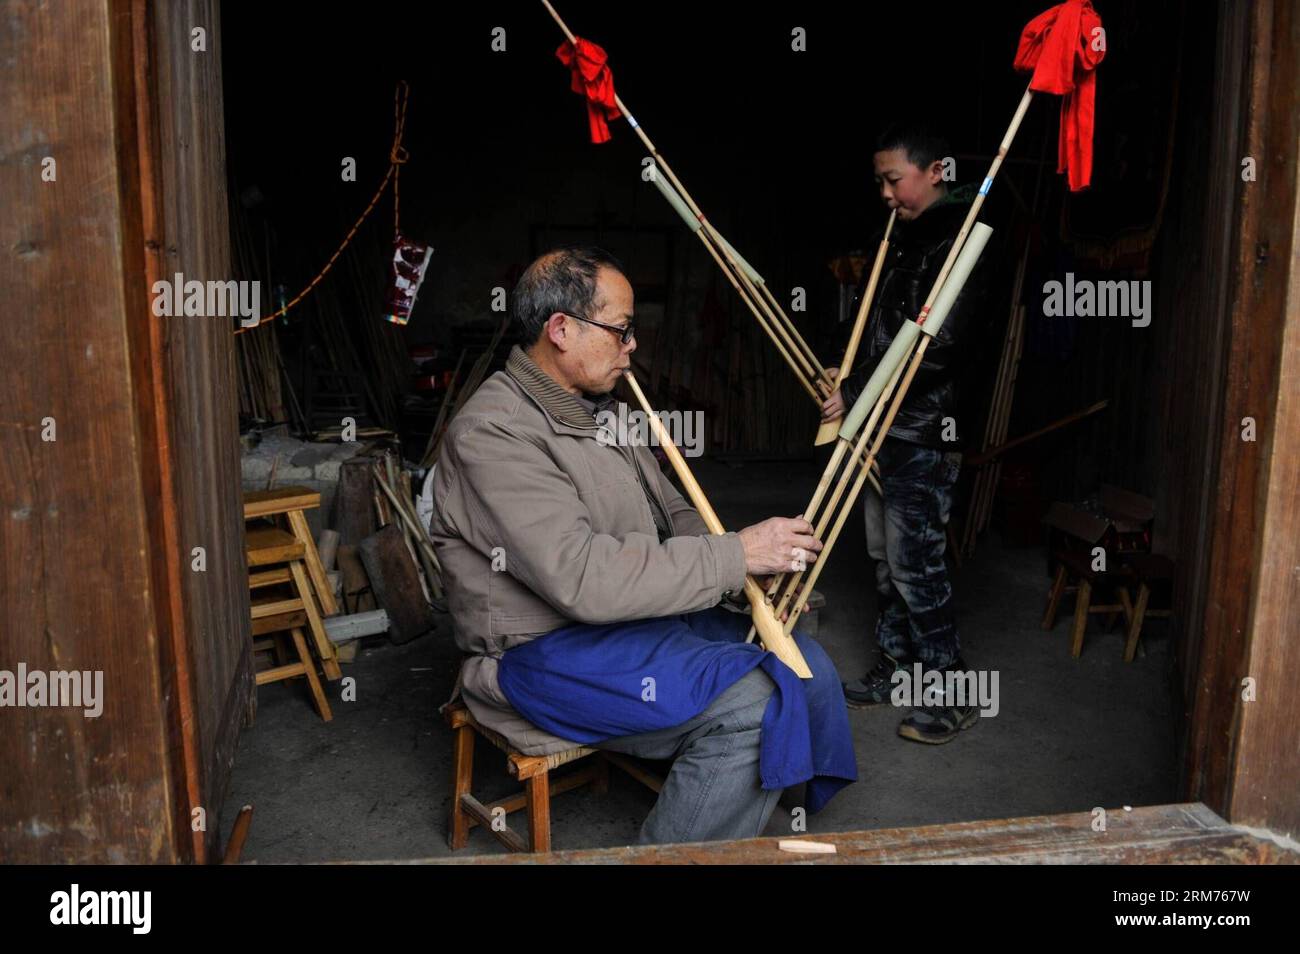 (140215) -- KAILI, Feb. 15, 2014 (Xinhua) -- Craftsman Pan Rouda tries a newly-made Lusheng, a kind of reed-pipe wind instrument, in Xin guang Village, Zhouxi Township, Qiandongnan Miao and Dong Autonomous Prefecture of southwest China s Guizhou Province, Feb. 15, 2014. Dubbed as the home of Lusheng , Xin guang has the tradition of making the wind instrument for some 400 years with 65 family workshops still making it at present. In the year of 2006, China listed the craft as the national intangible cultural heritage. (Xinhua/Ou Dongqu) (hdt) CHINA-GUIZHOU-LUSHENG (CN) PUBLICATIONxNOTxINxCHN Stock Photo